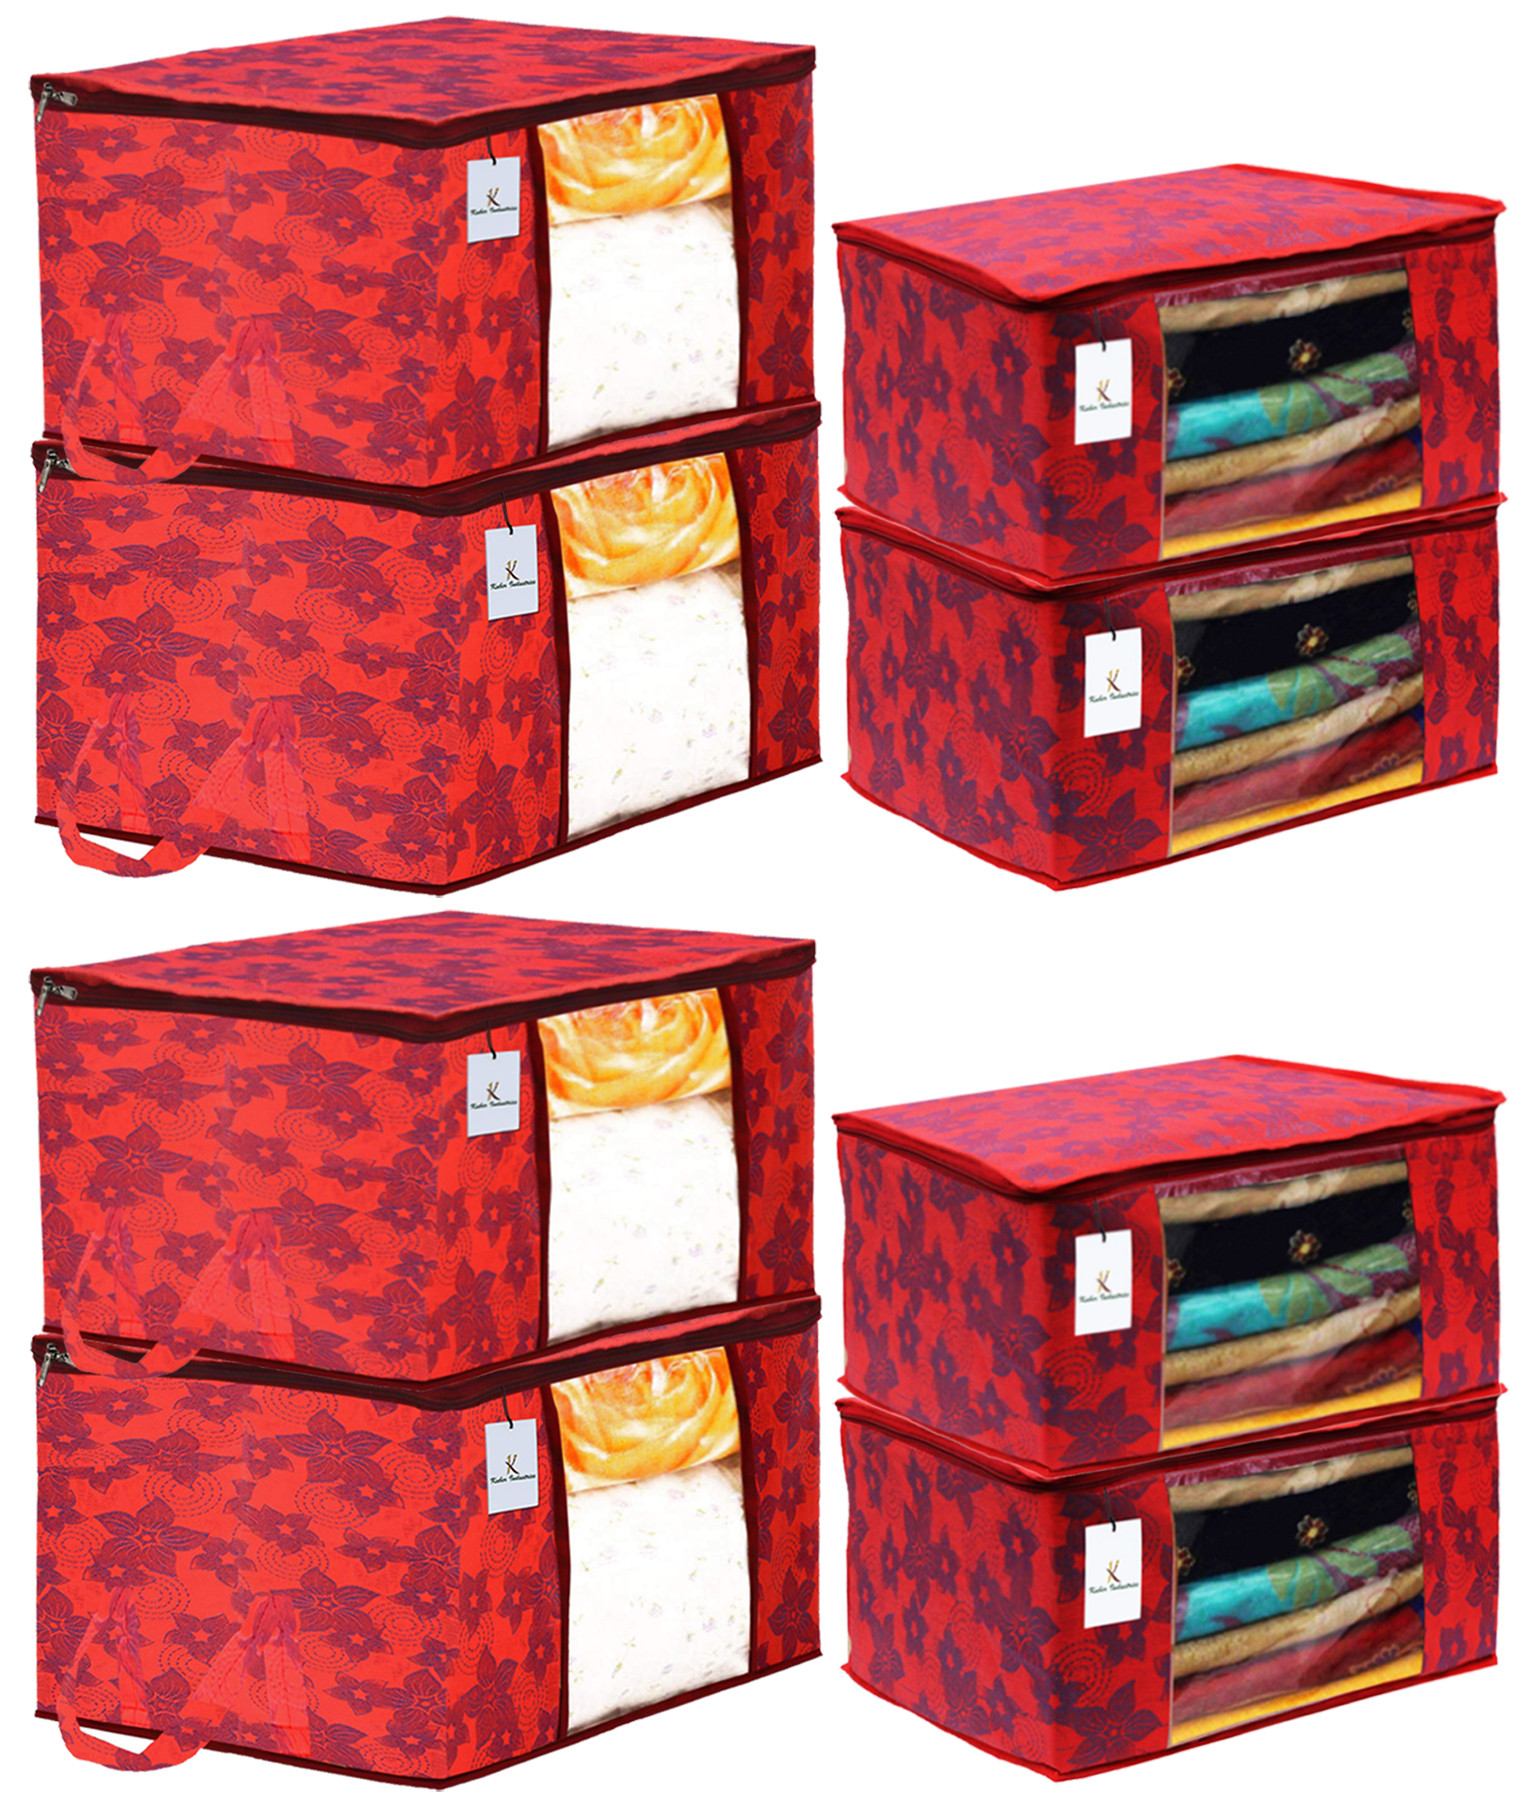 Kuber Industries Metallic Printed Non Woven Saree Cover And Underbed Storage Bag, Cloth Organizer For Storage, Blanket Cover Combo Set (Red) -CTKTC38547